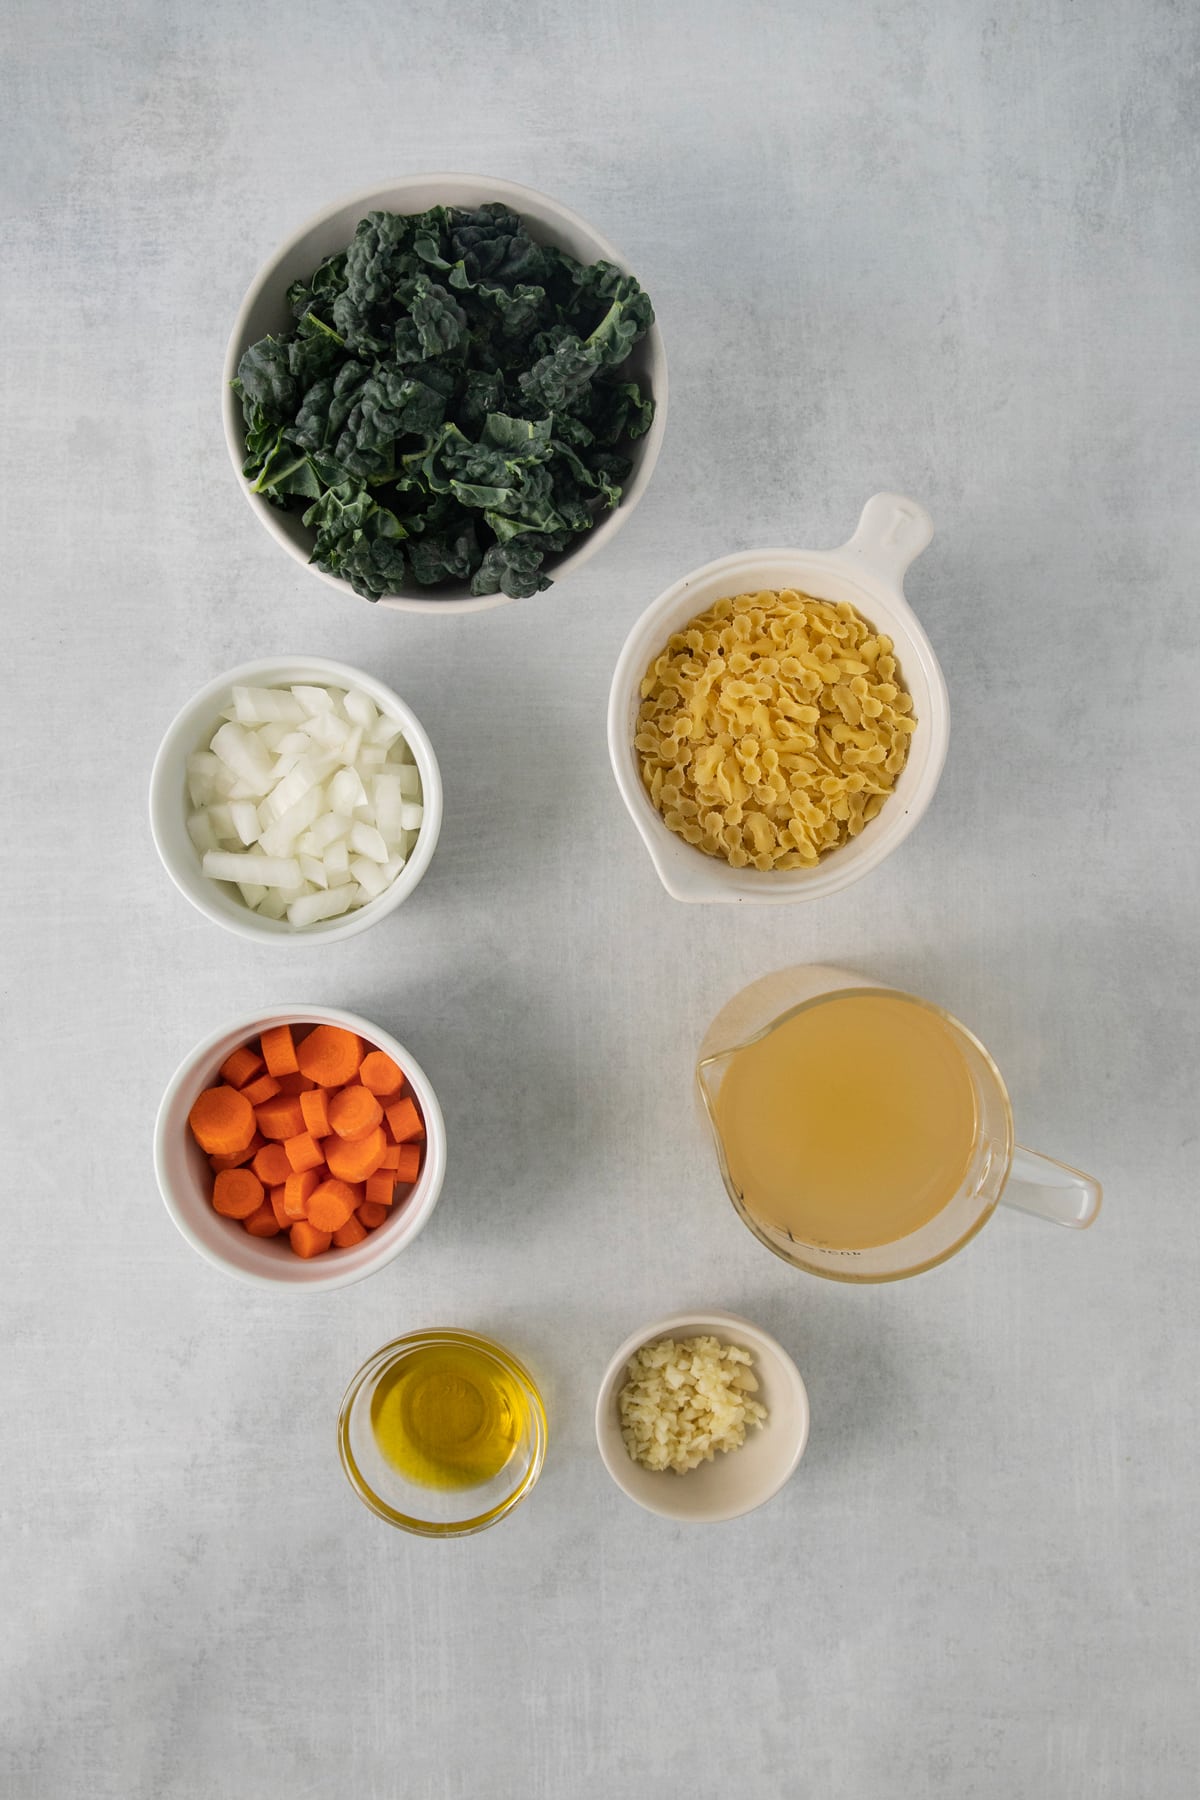 Ingredients for the Italian Wedding Soup are the following: Olive oil, sliced carrots, diced onion, chicken stock, dried pasta, and tuscan kale.